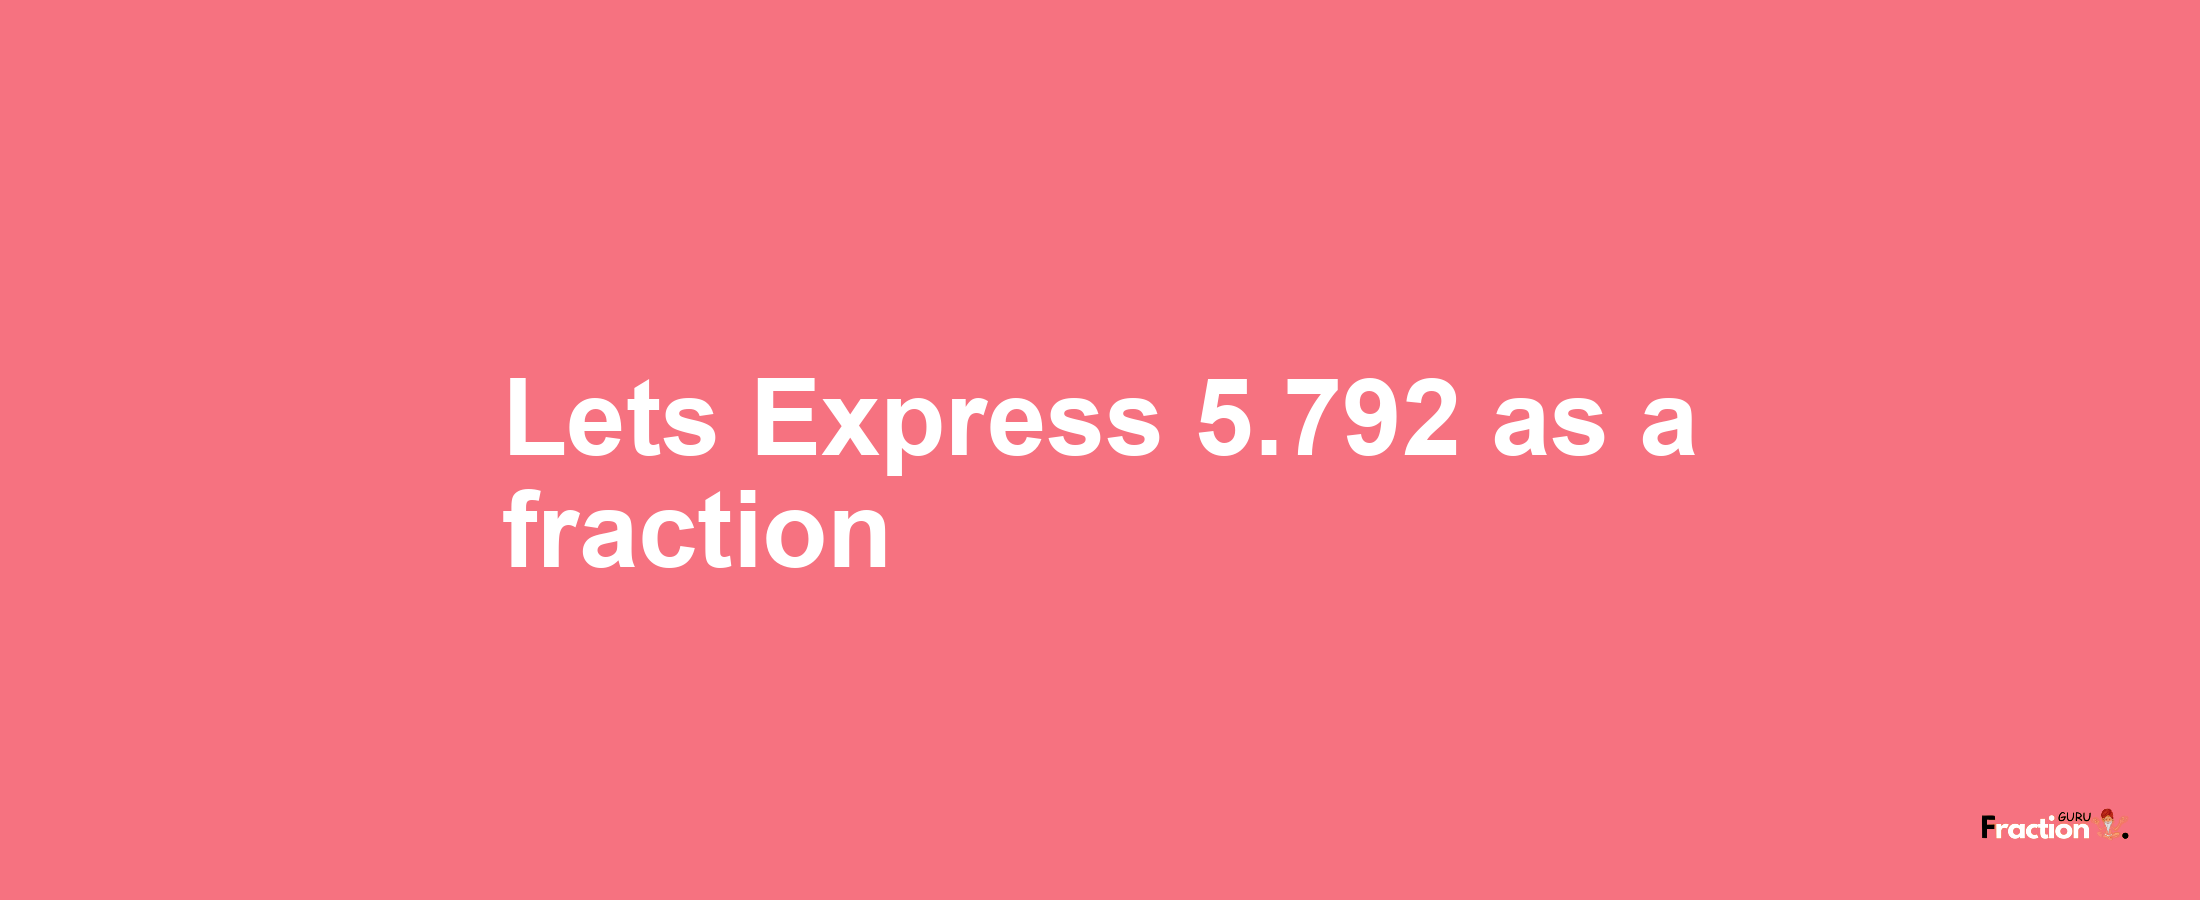 Lets Express 5.792 as afraction